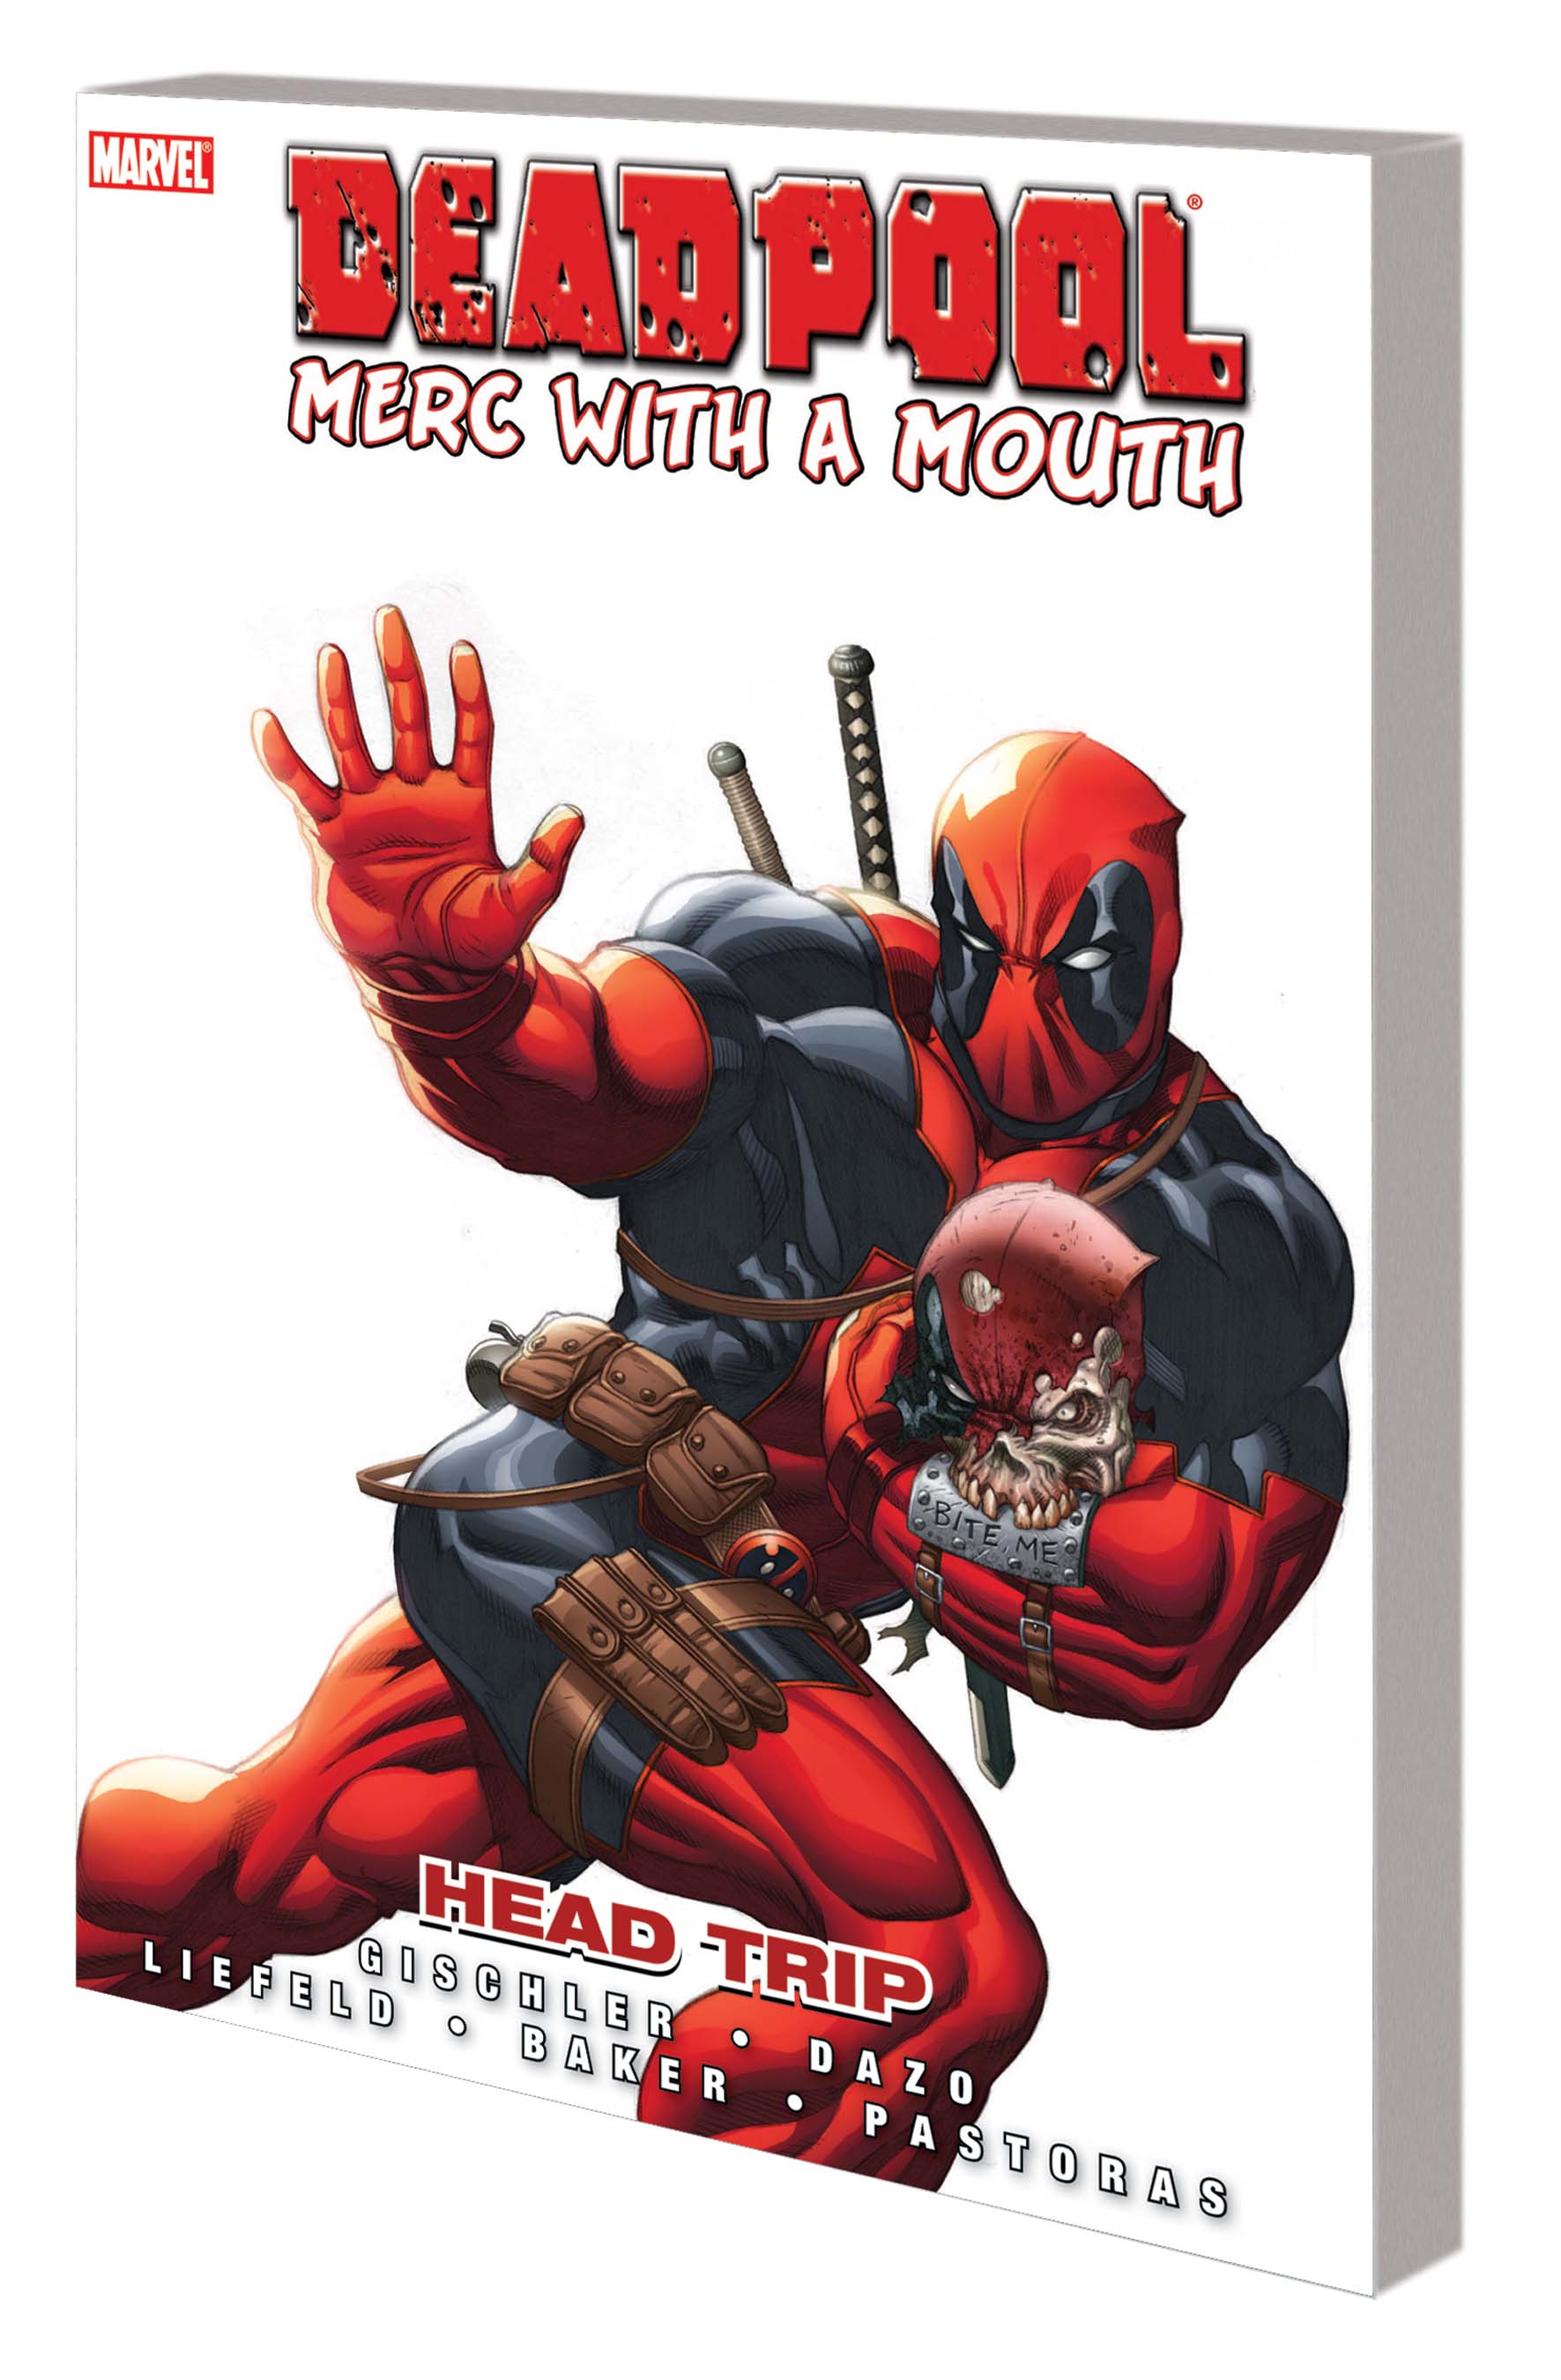 Deadpool: Merc with a Mouth Vol. 1 - Head Trip (Trade Paperback)